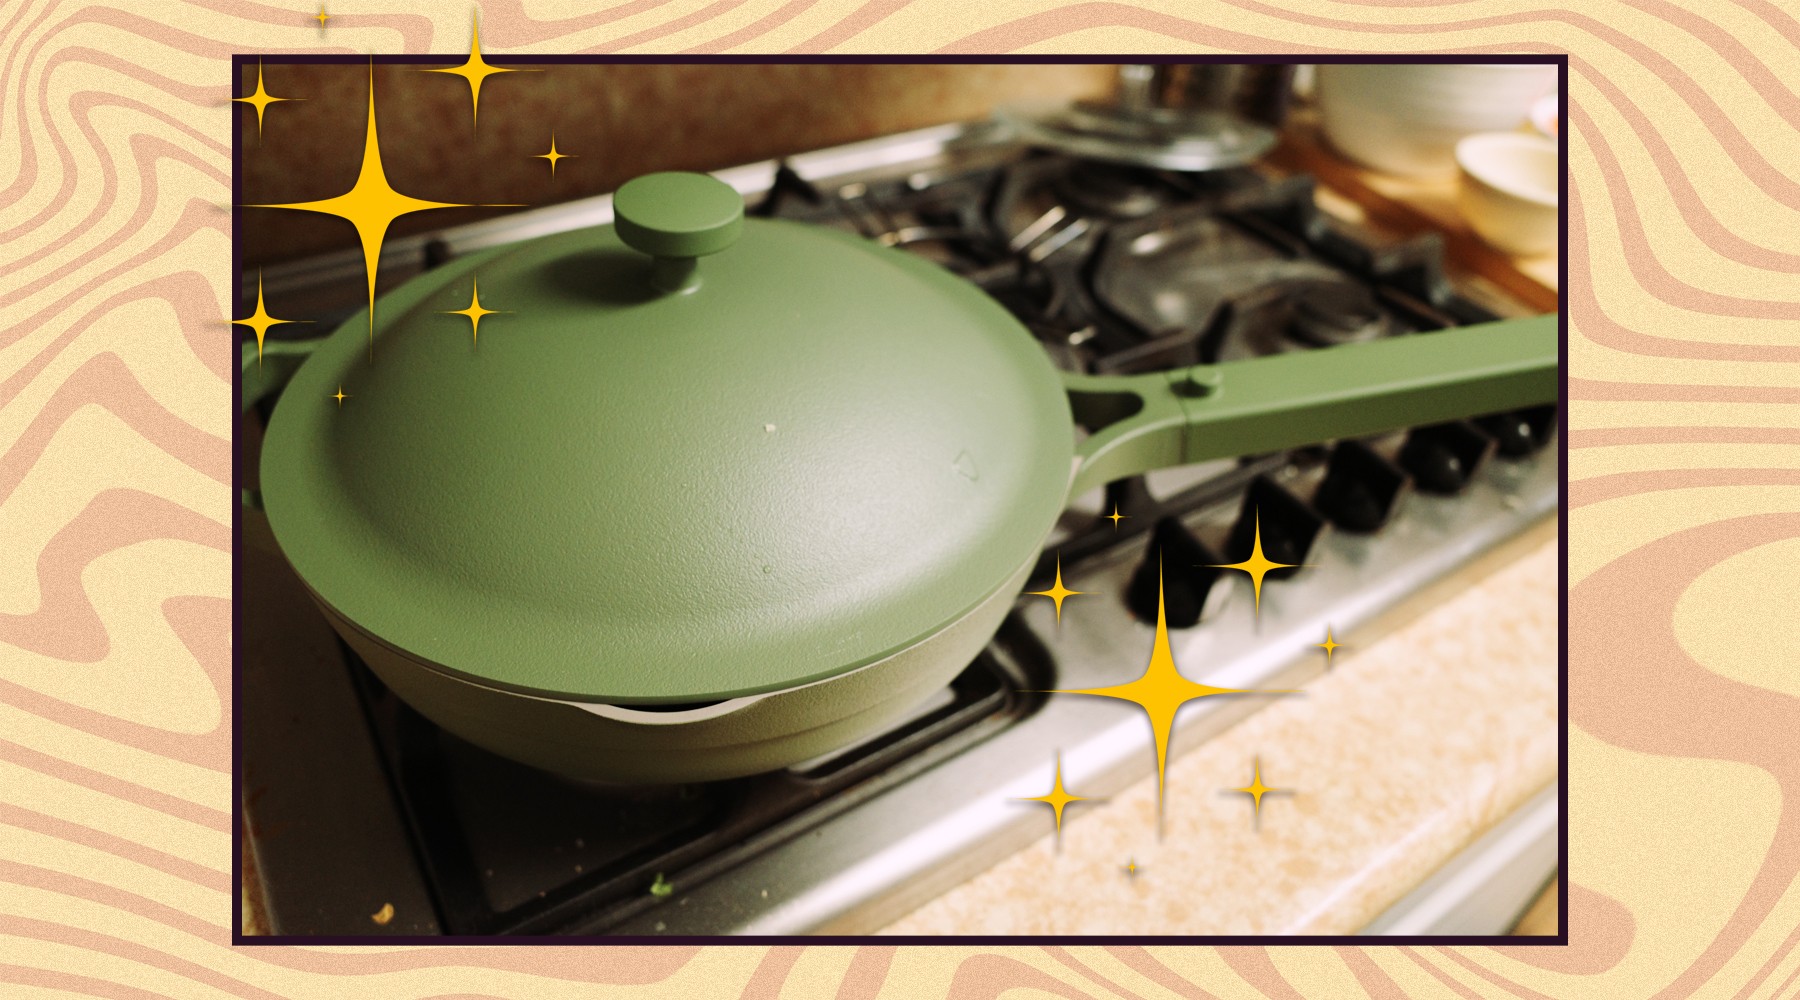 The Anything Pan - Non-Stick Griddle Pan with Detachable Handle - by Jean Patrique